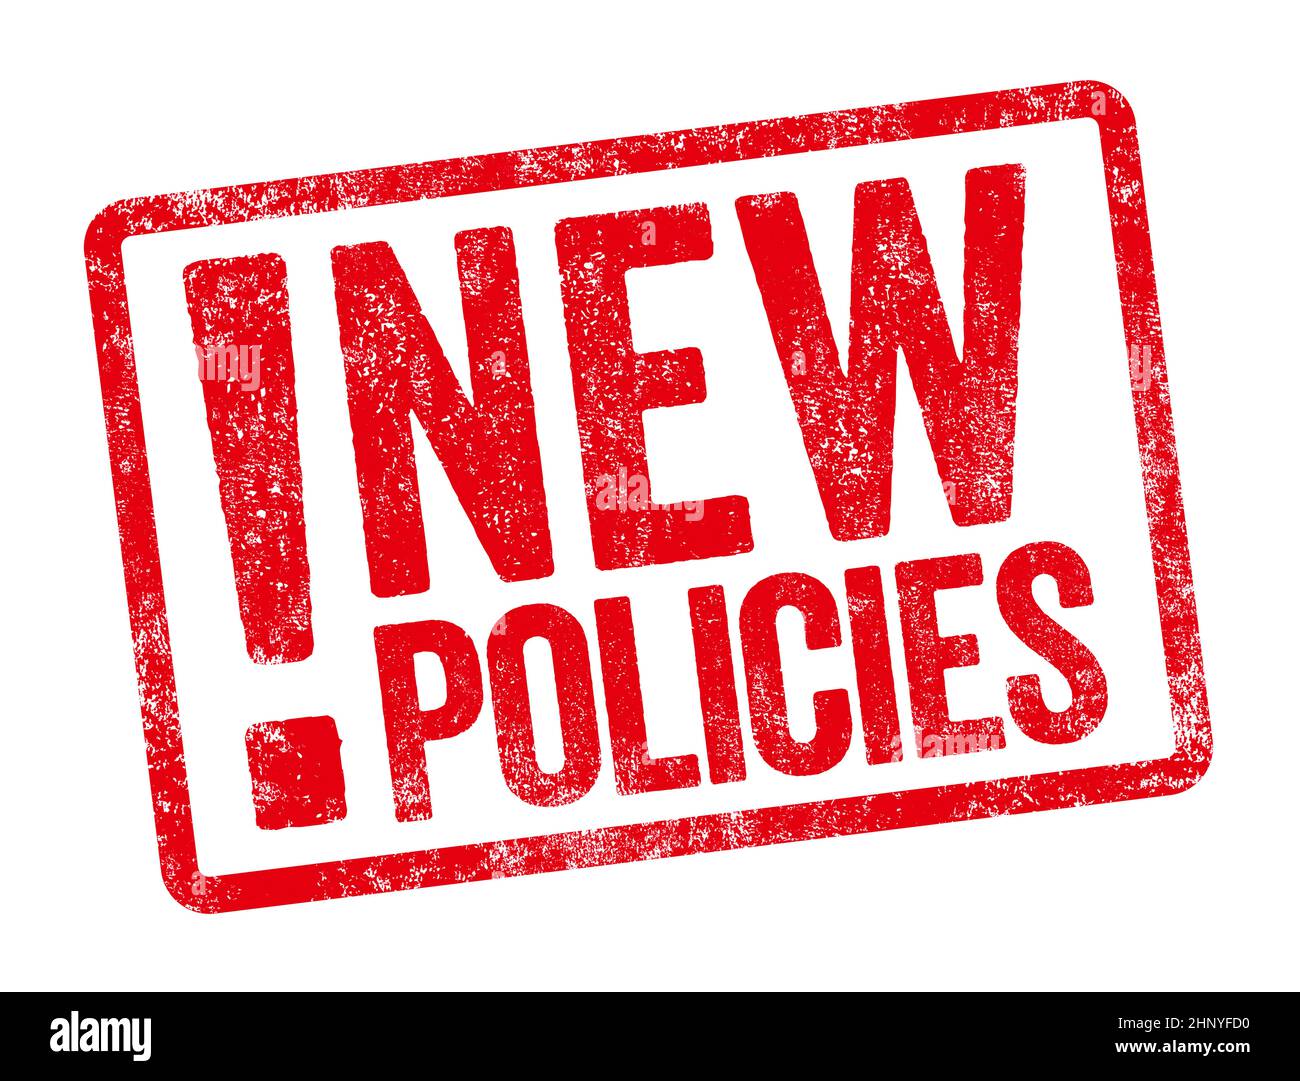 Red stamp on a white background - New policies Stock Photo